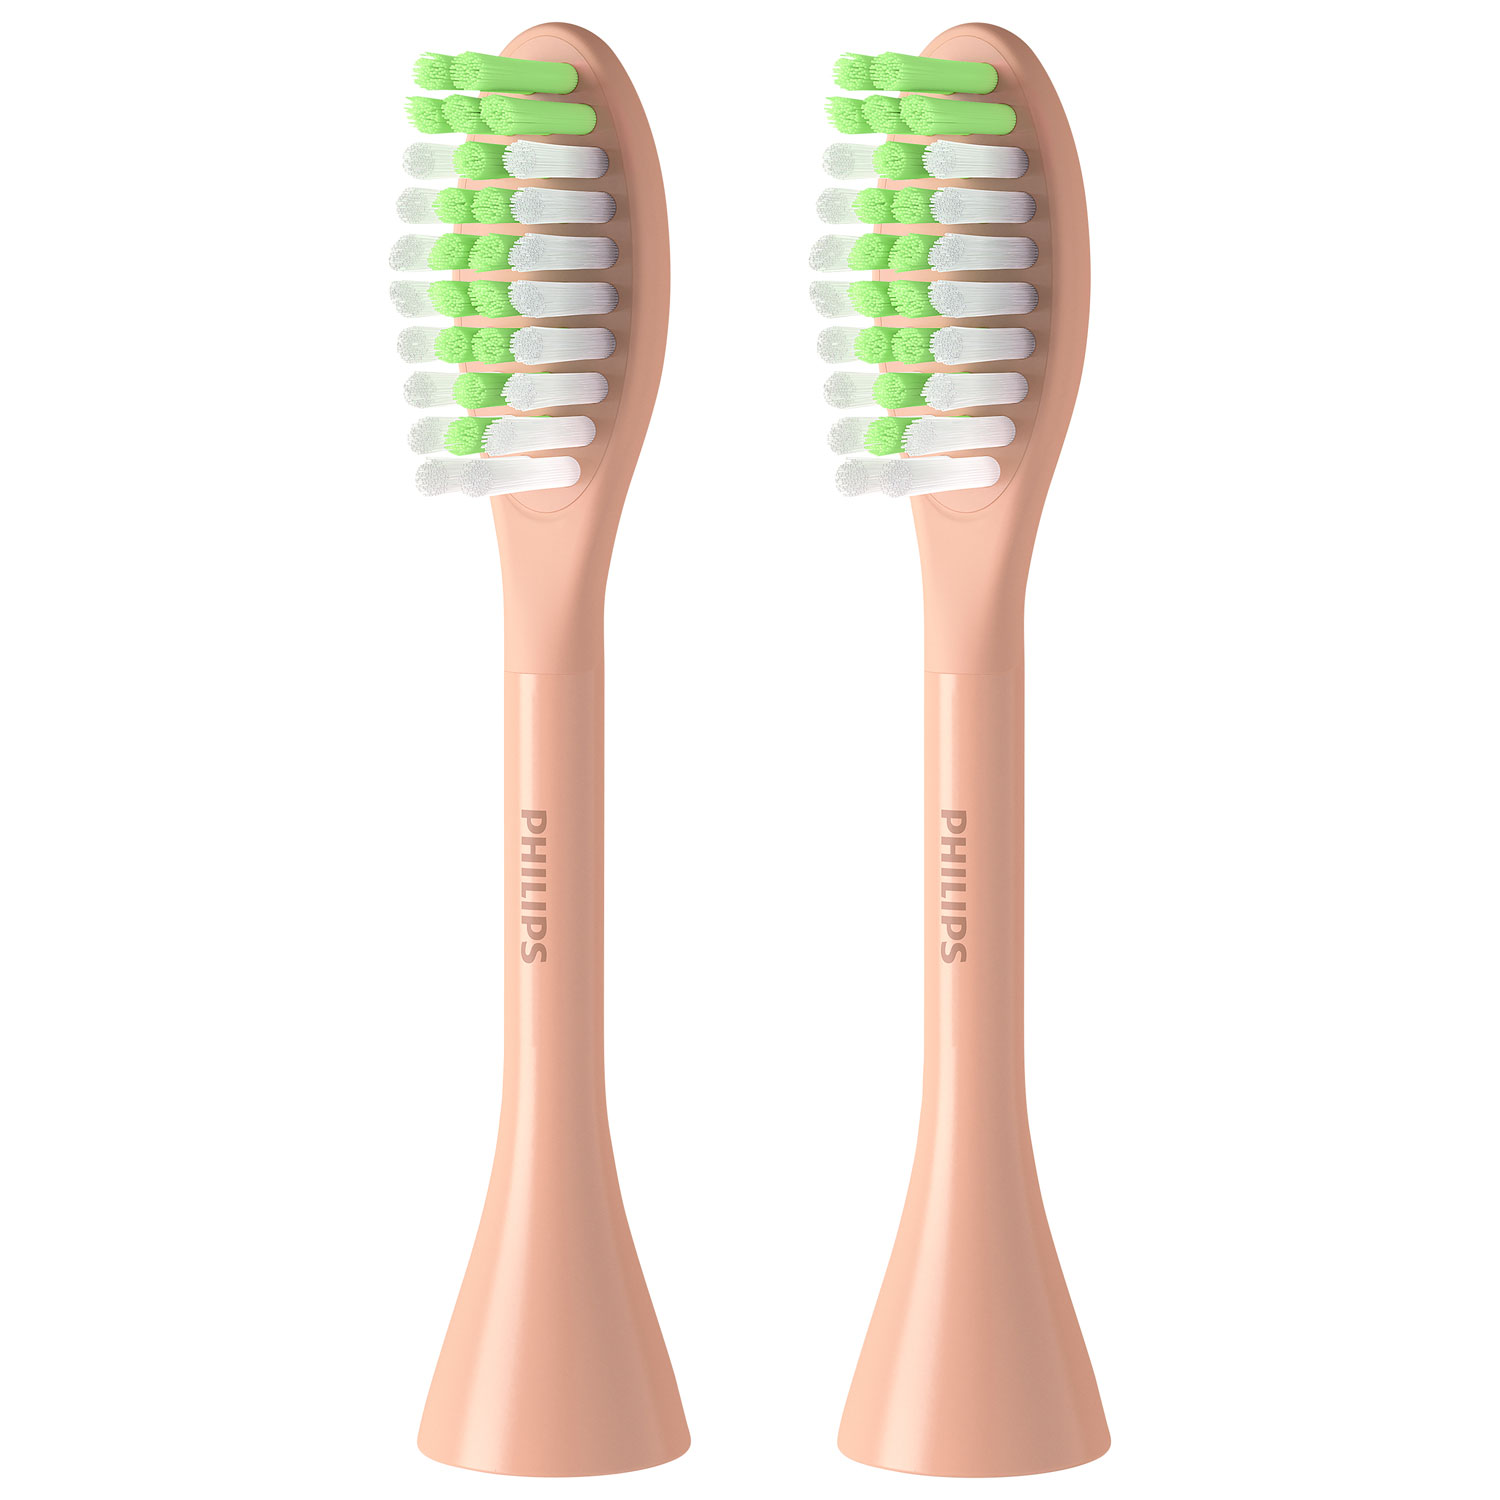 Philips One by Sonicare Replacement Brush Head (BH1022/05) - 2 Pack - Champagne